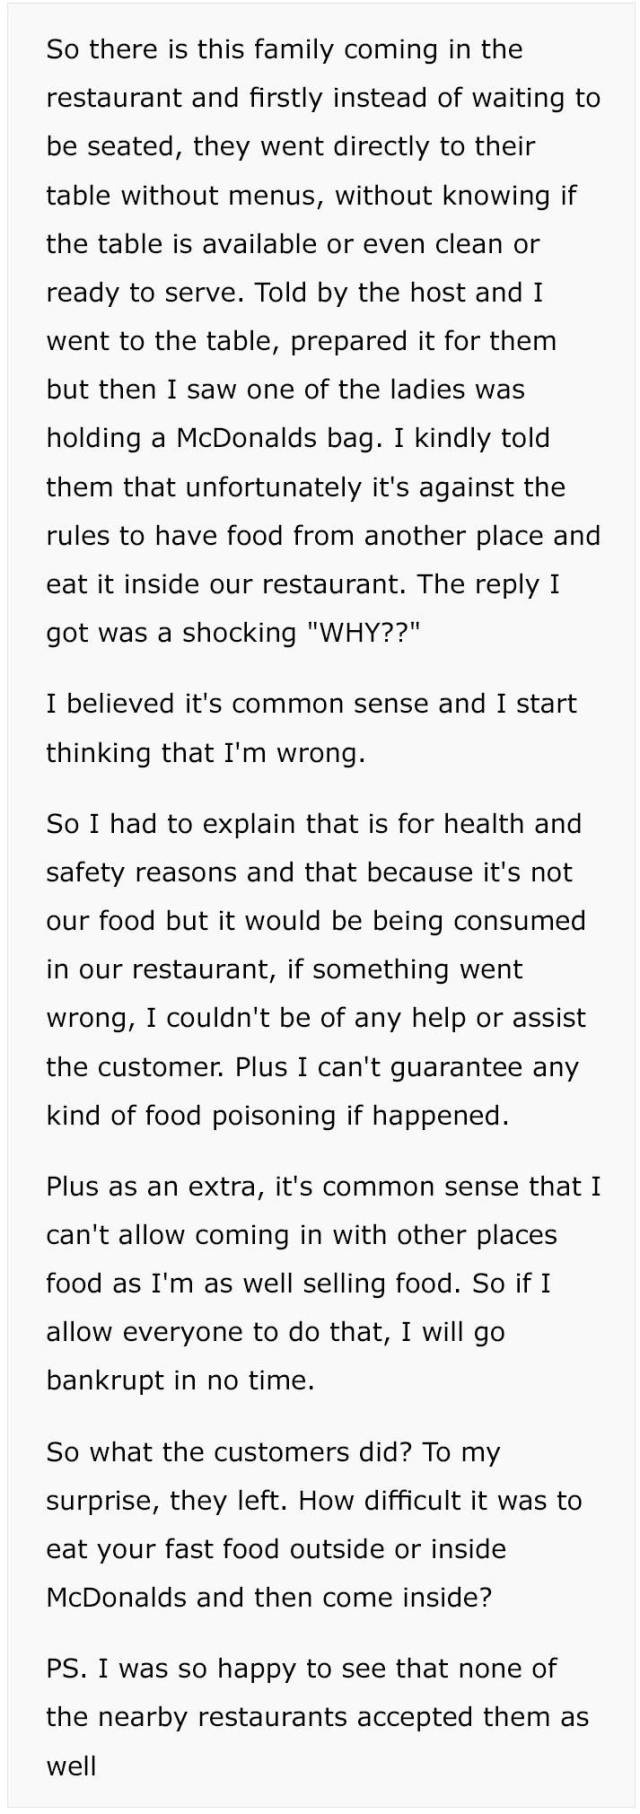 Working At A Restaurant Could Be A Real Challenge